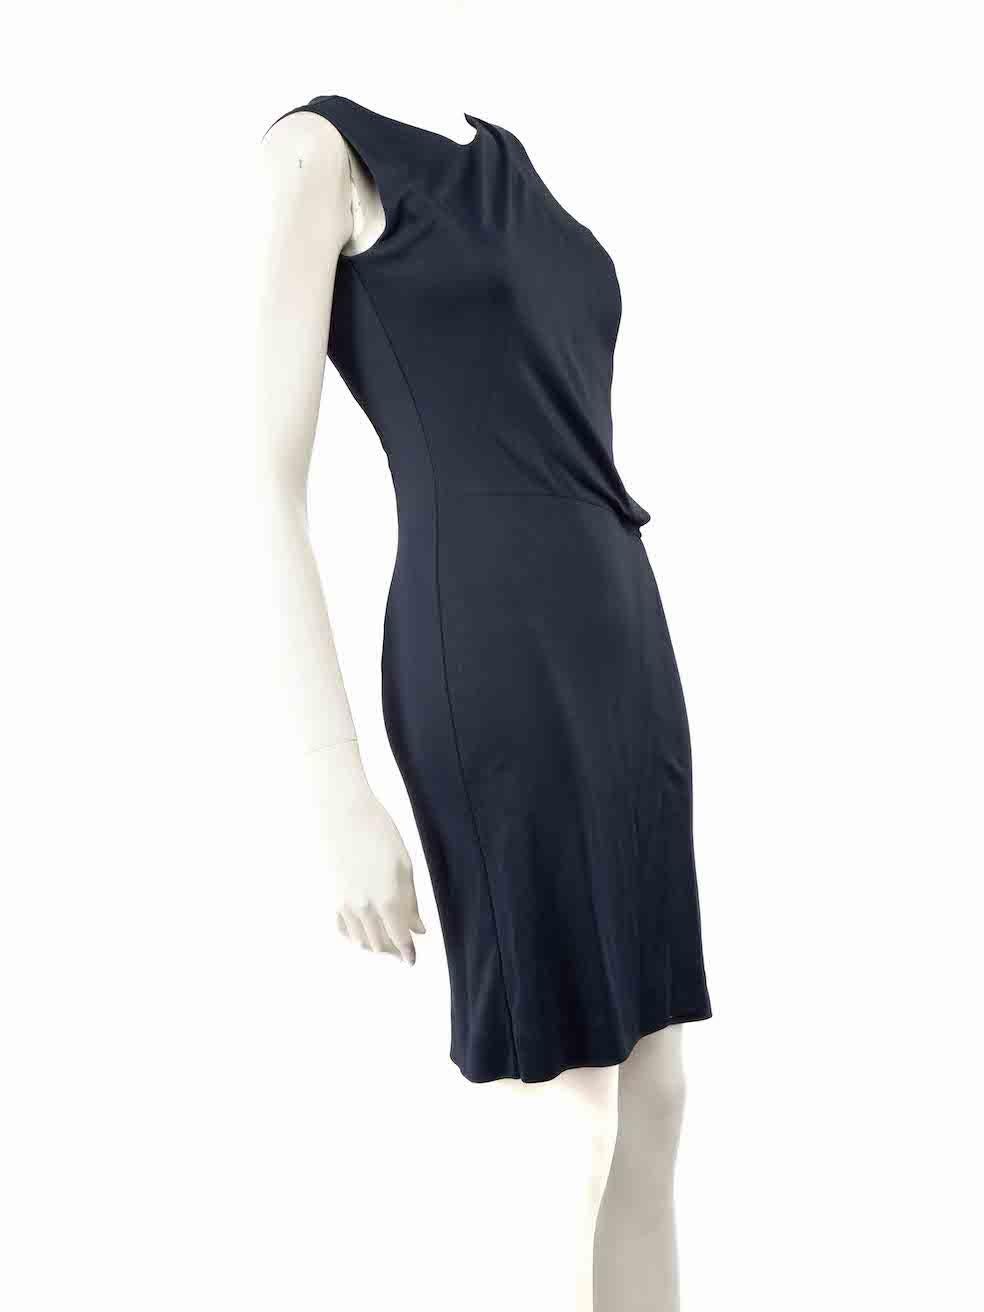 CONDITION is Very good. Hardly any visible wear to dress is evident. The size and composition label is missing on this used Alberta Ferretti designer resale item.
 
 
 
 Details
 
 
 Navy
 
 Synthetic
 
 Knee length dress
 
 Round neckline
 
